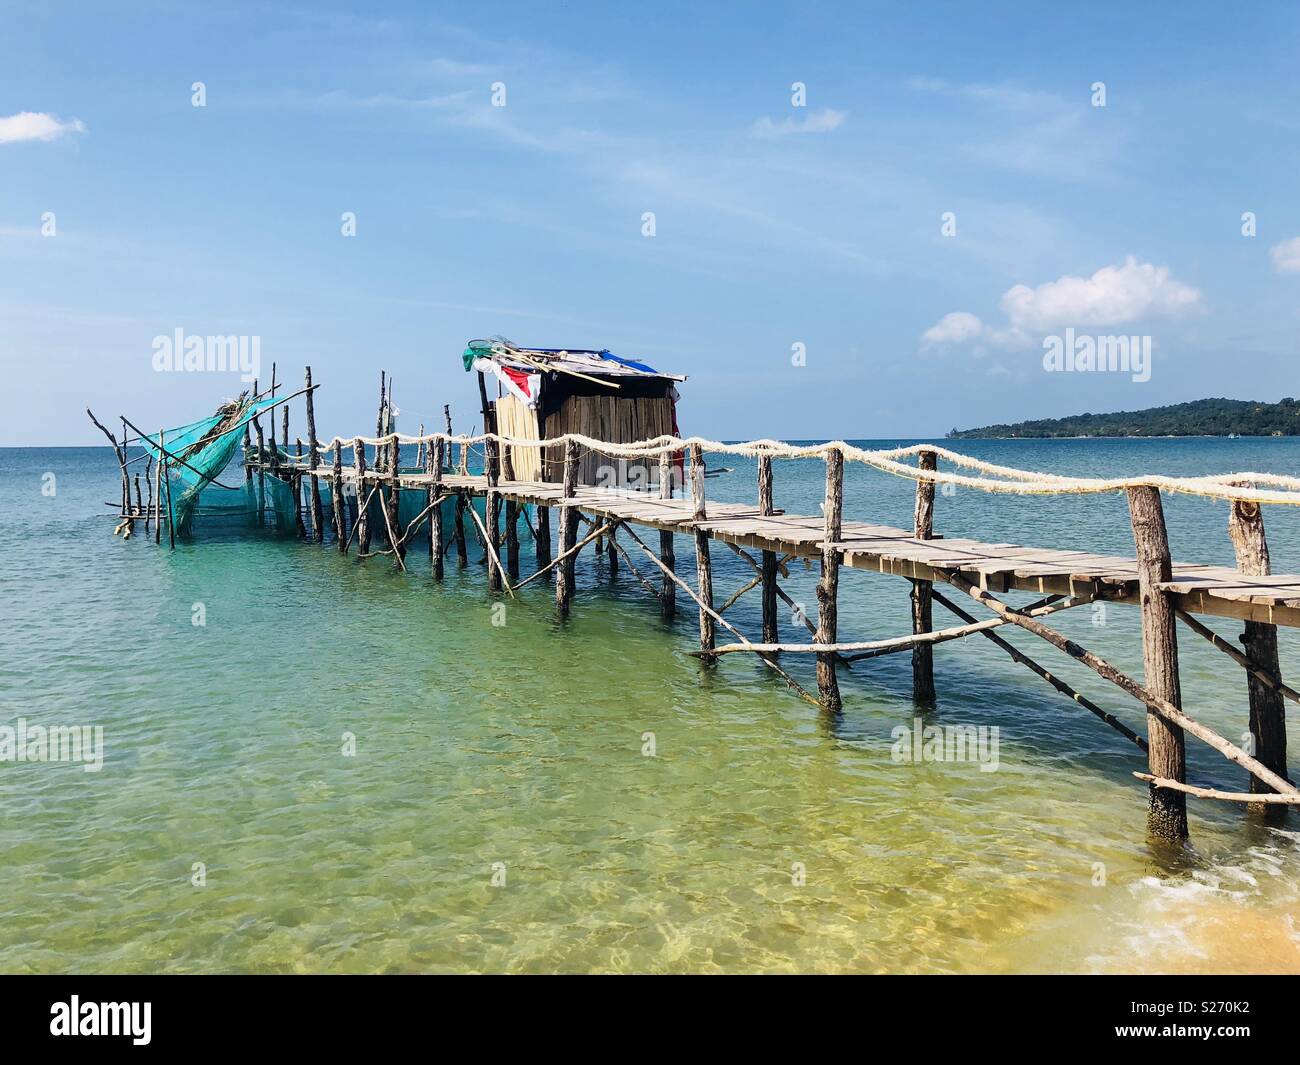 https://c8.alamy.com/comp/S270K2/fishing-pier-on-a-tropical-beach-with-fishing-nets-and-hut-S270K2.jpg